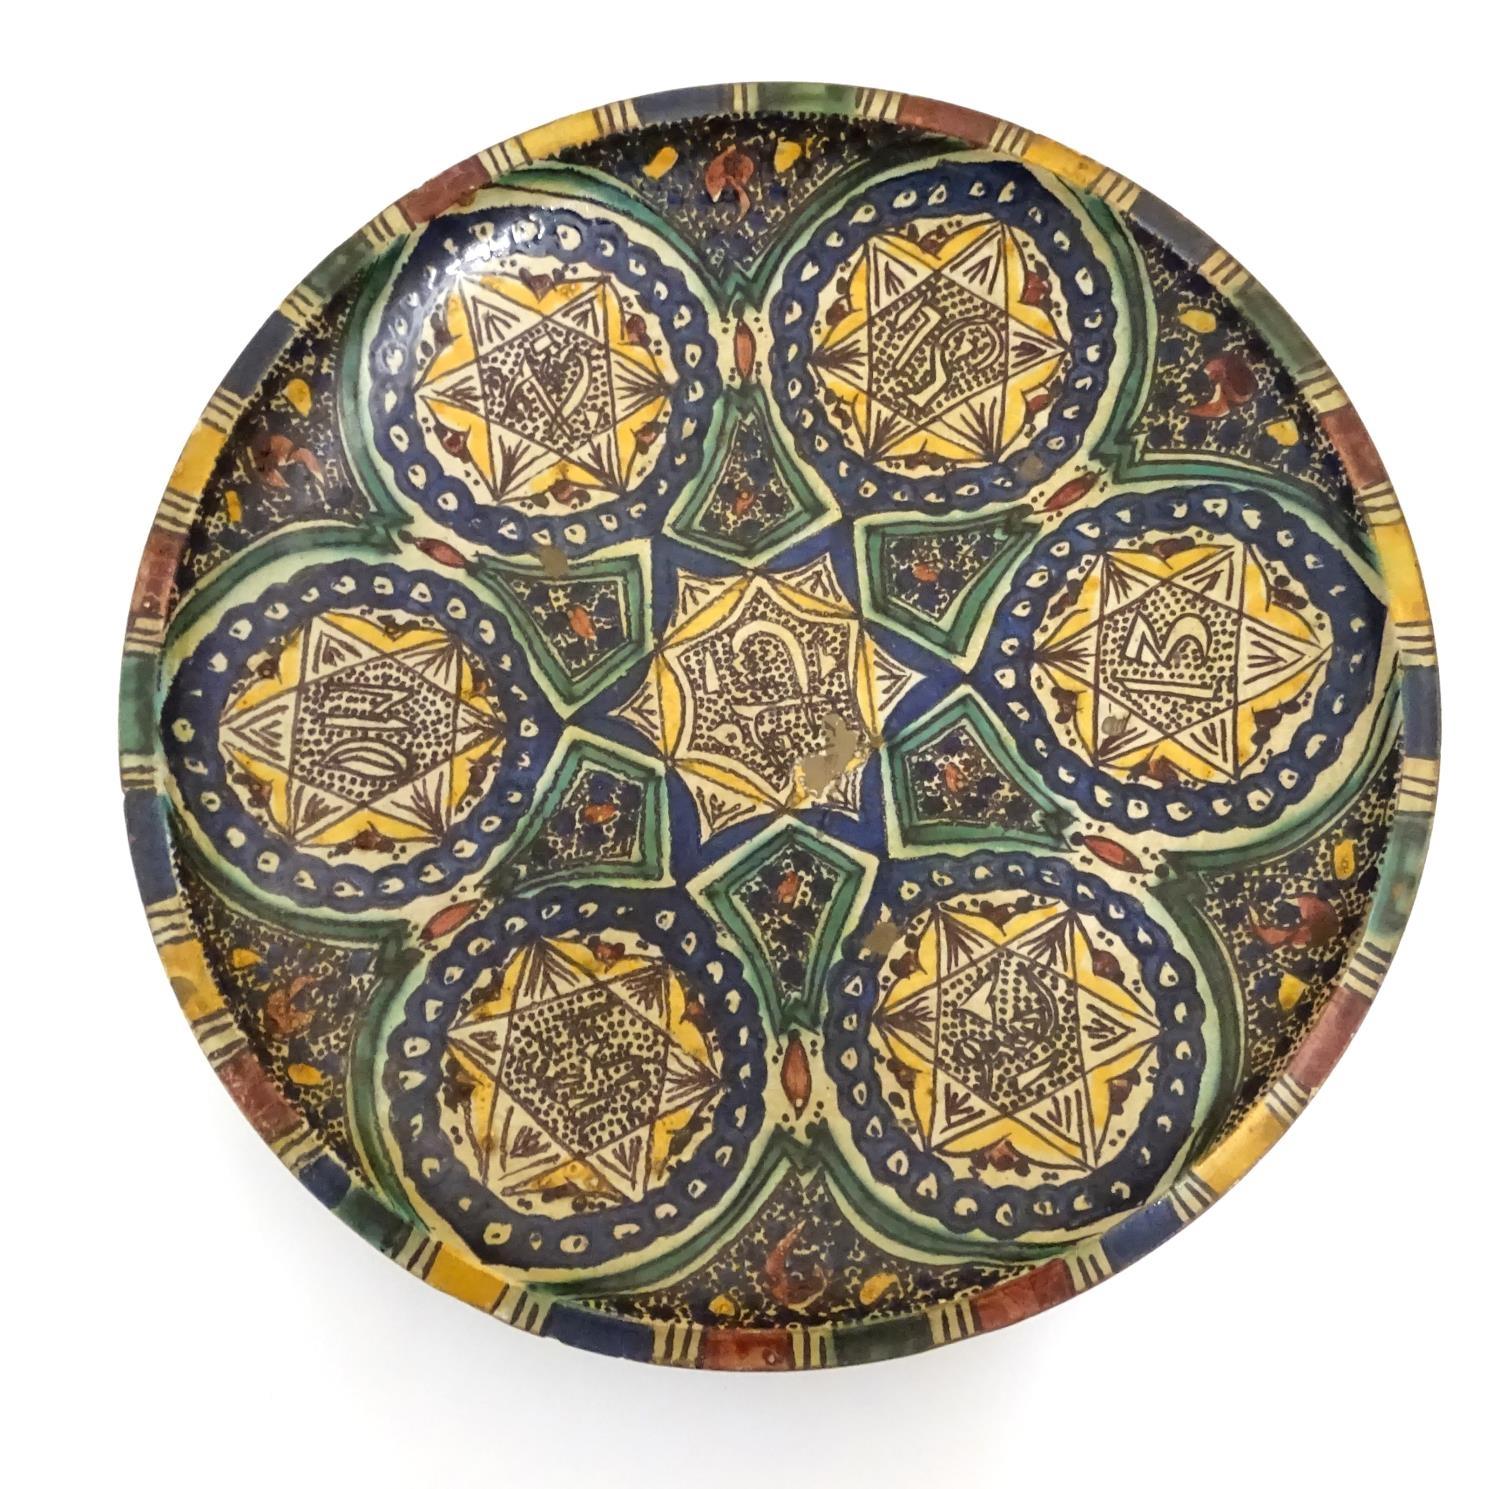 A Moroccan charger with geometric designs, vignettes with six point star detail and Islamic